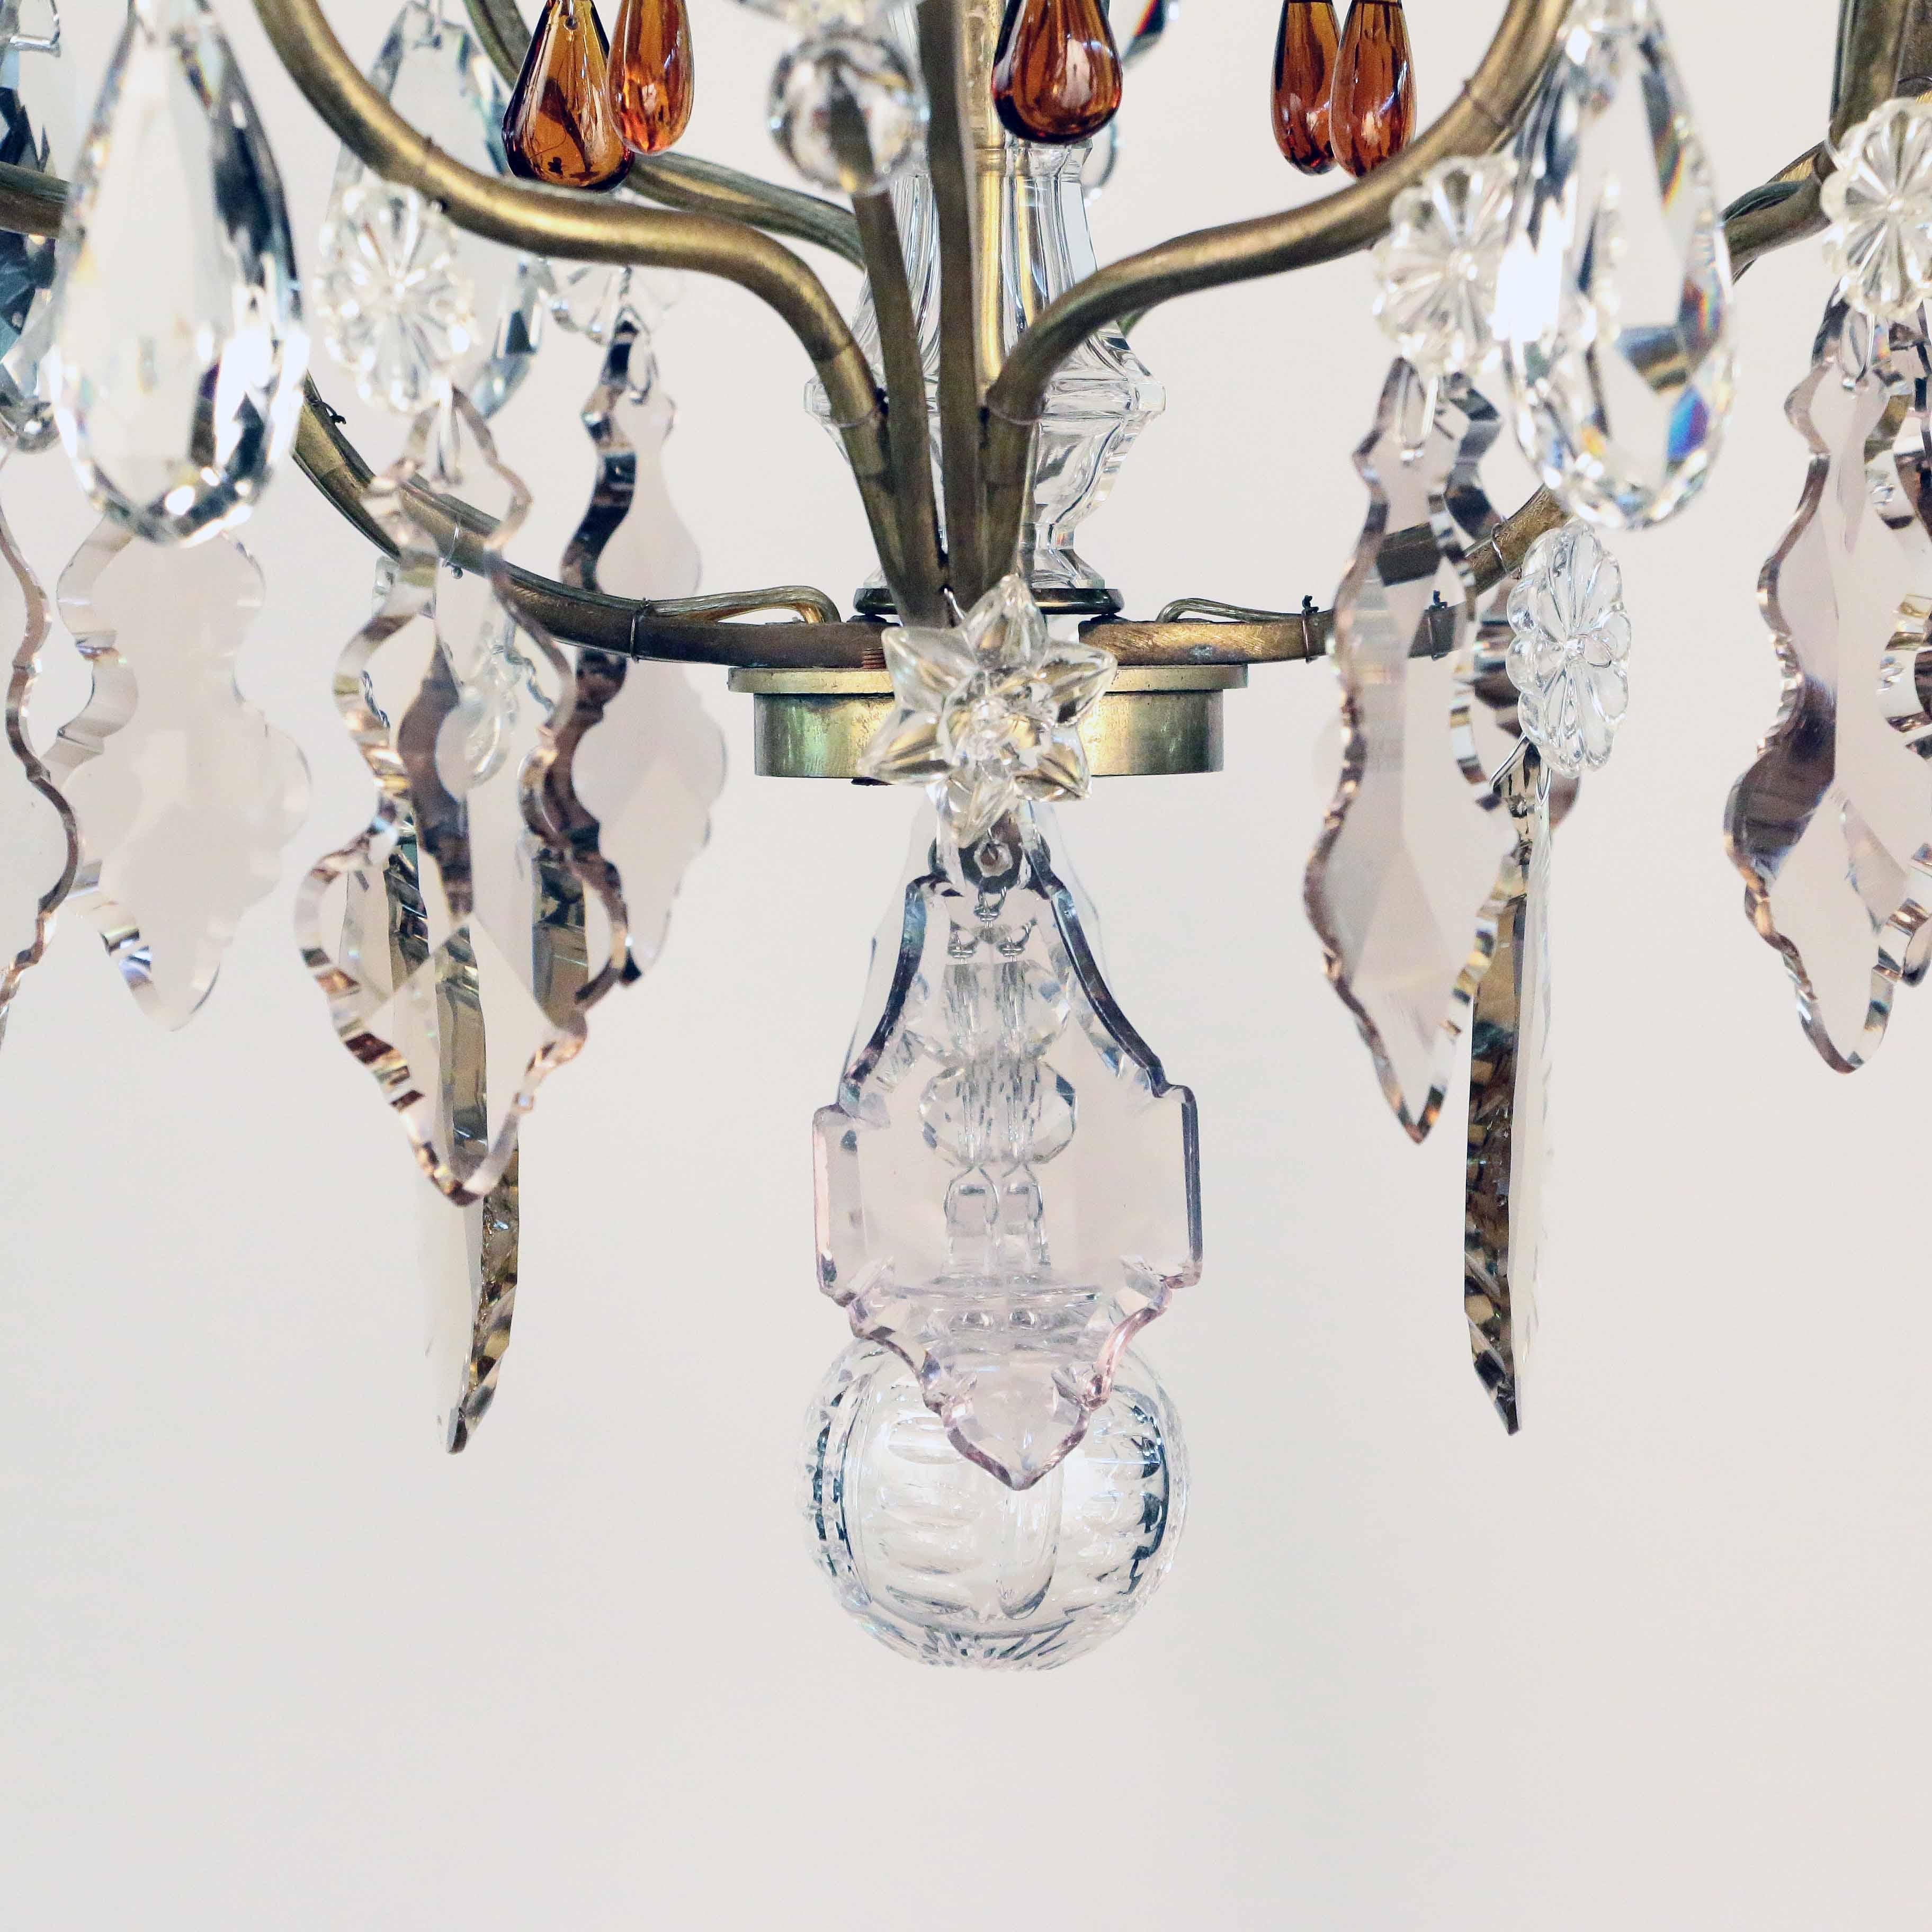 This fixture has a number of unusual qualities. The arms are pierced and bifurcated which adds a sense of lightness. It is decorated with various colored crystal pendants. The finials are hand-blown bulbous spires. The overall effect is light and